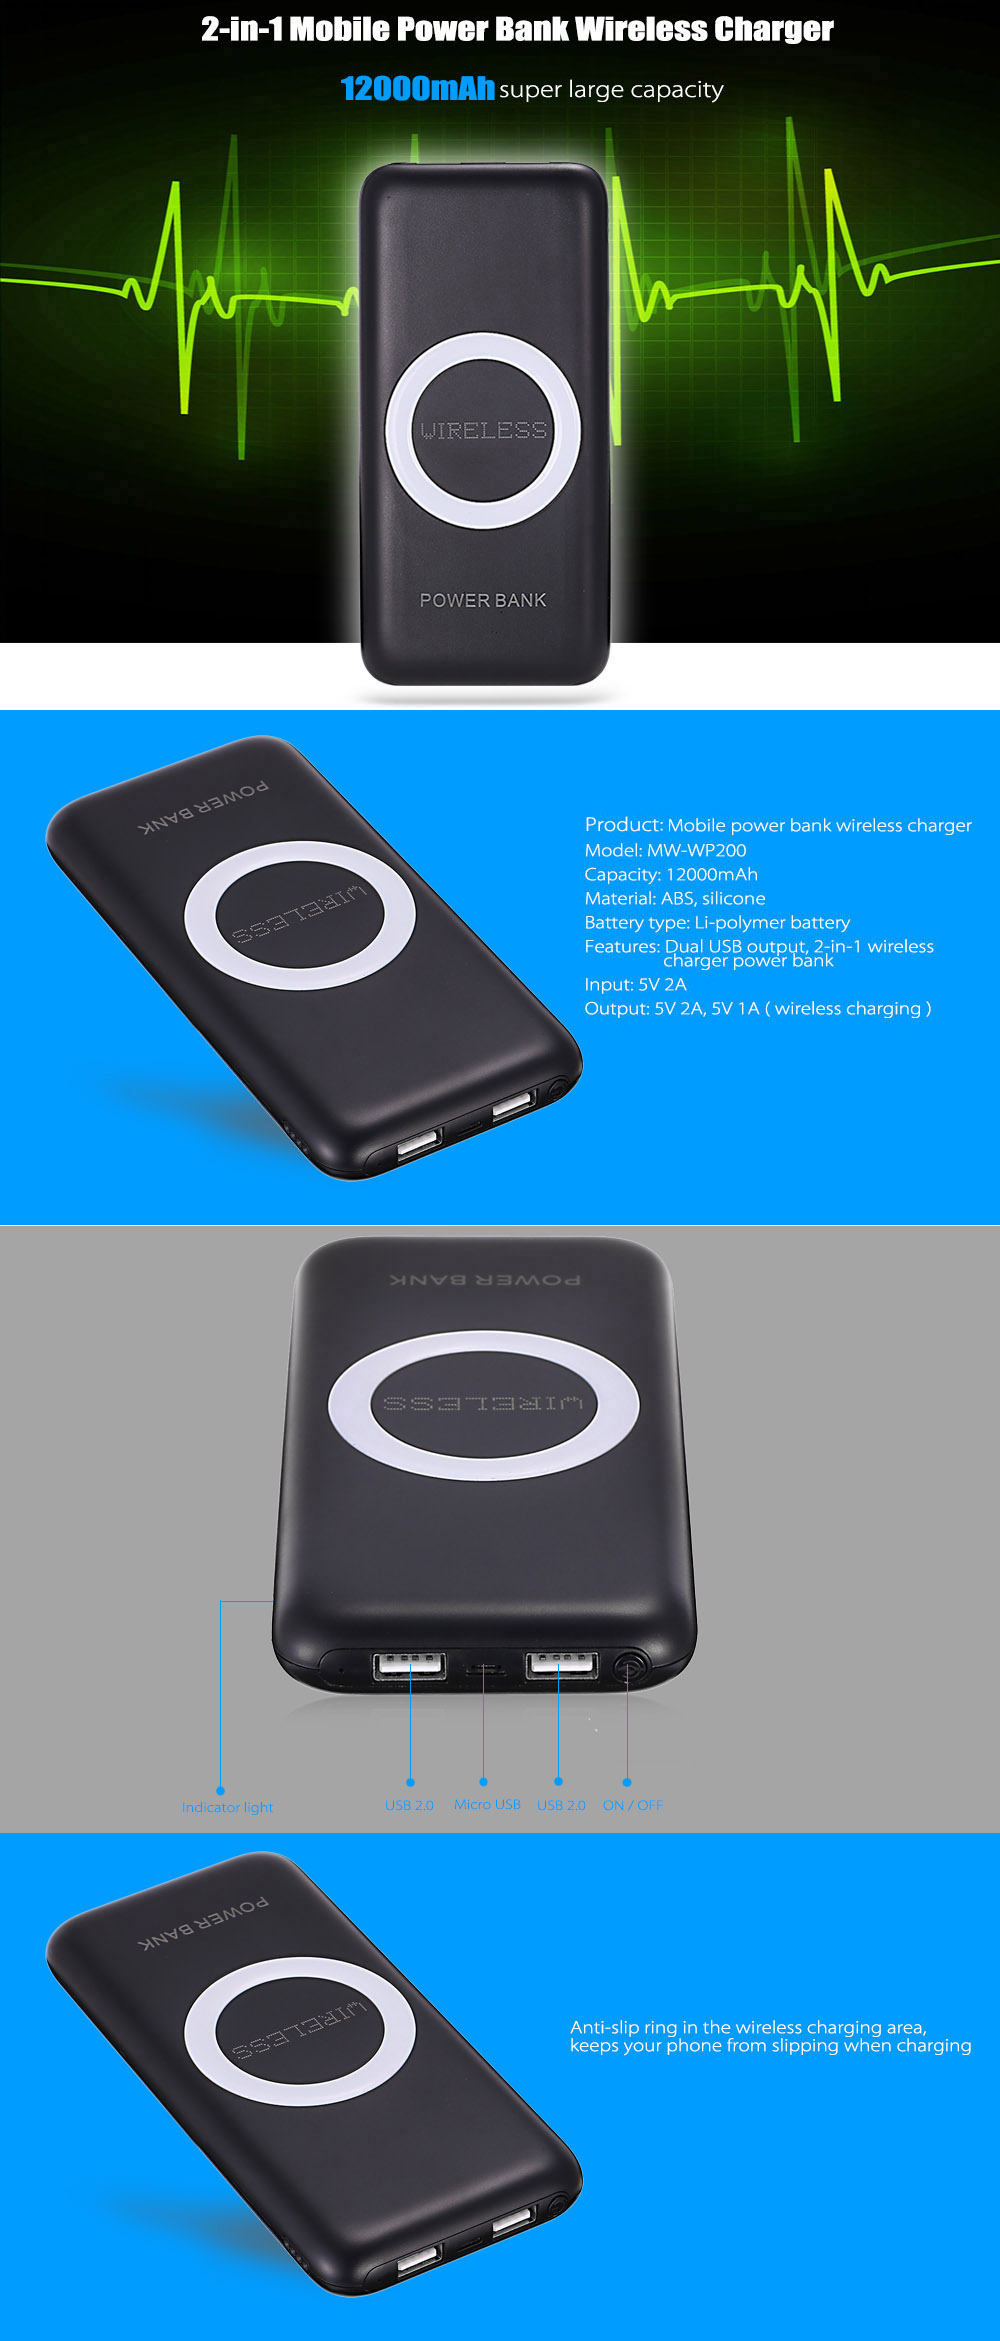 MW - WP200 2-in-1 12000mAh Mobile Power Bank Wireless Charger Transmitter Launcher Dual USB Output